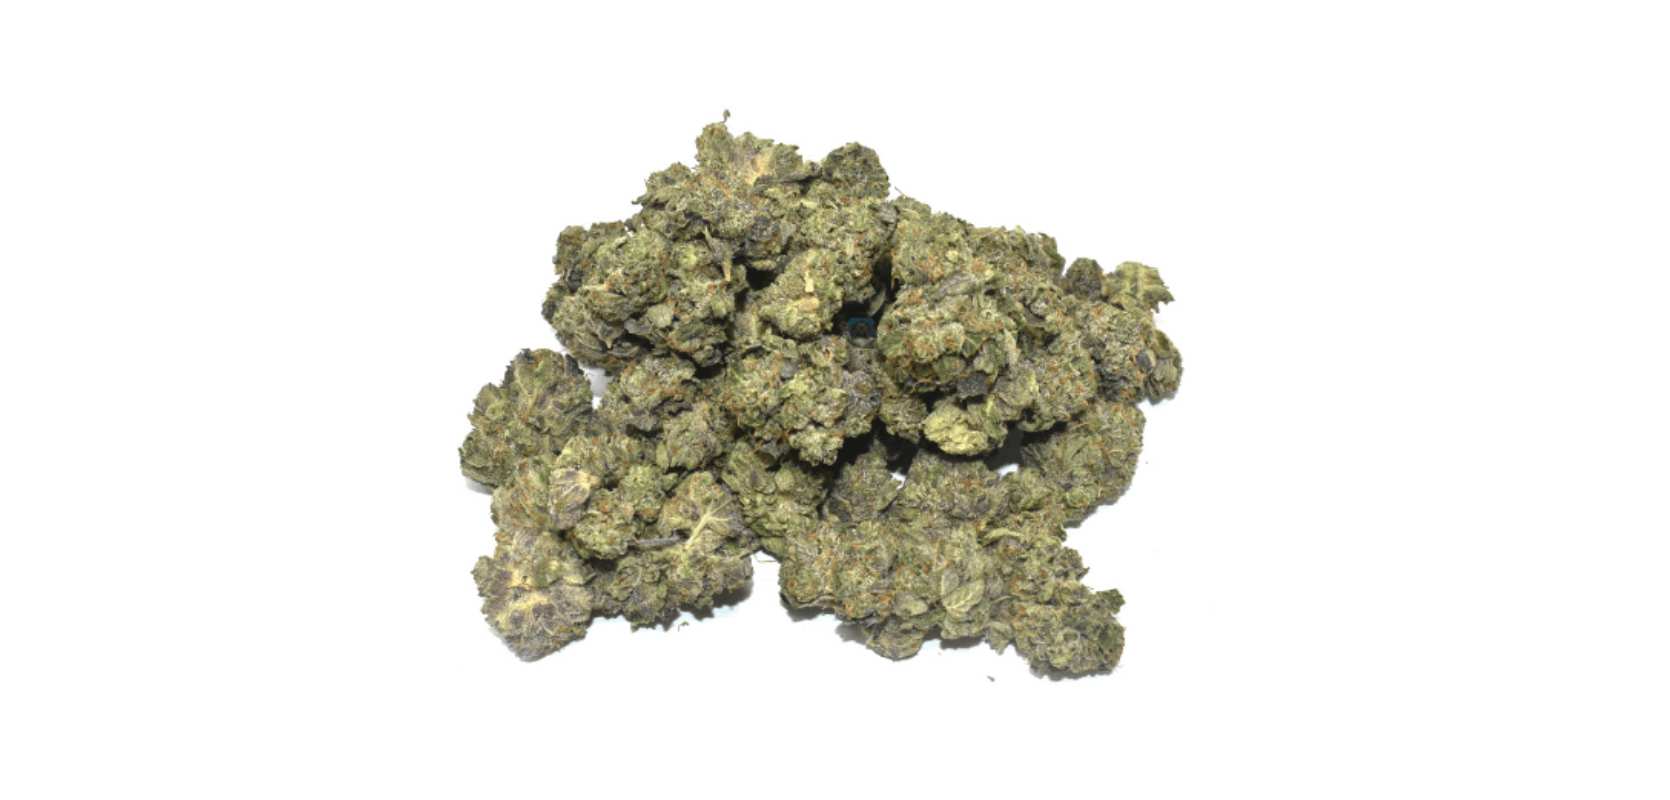 If you're looking for an Indica strain to help you relax and uplift, then Gas Face is a great choice to buy weed online in Canada from an online weed dispensary.. 